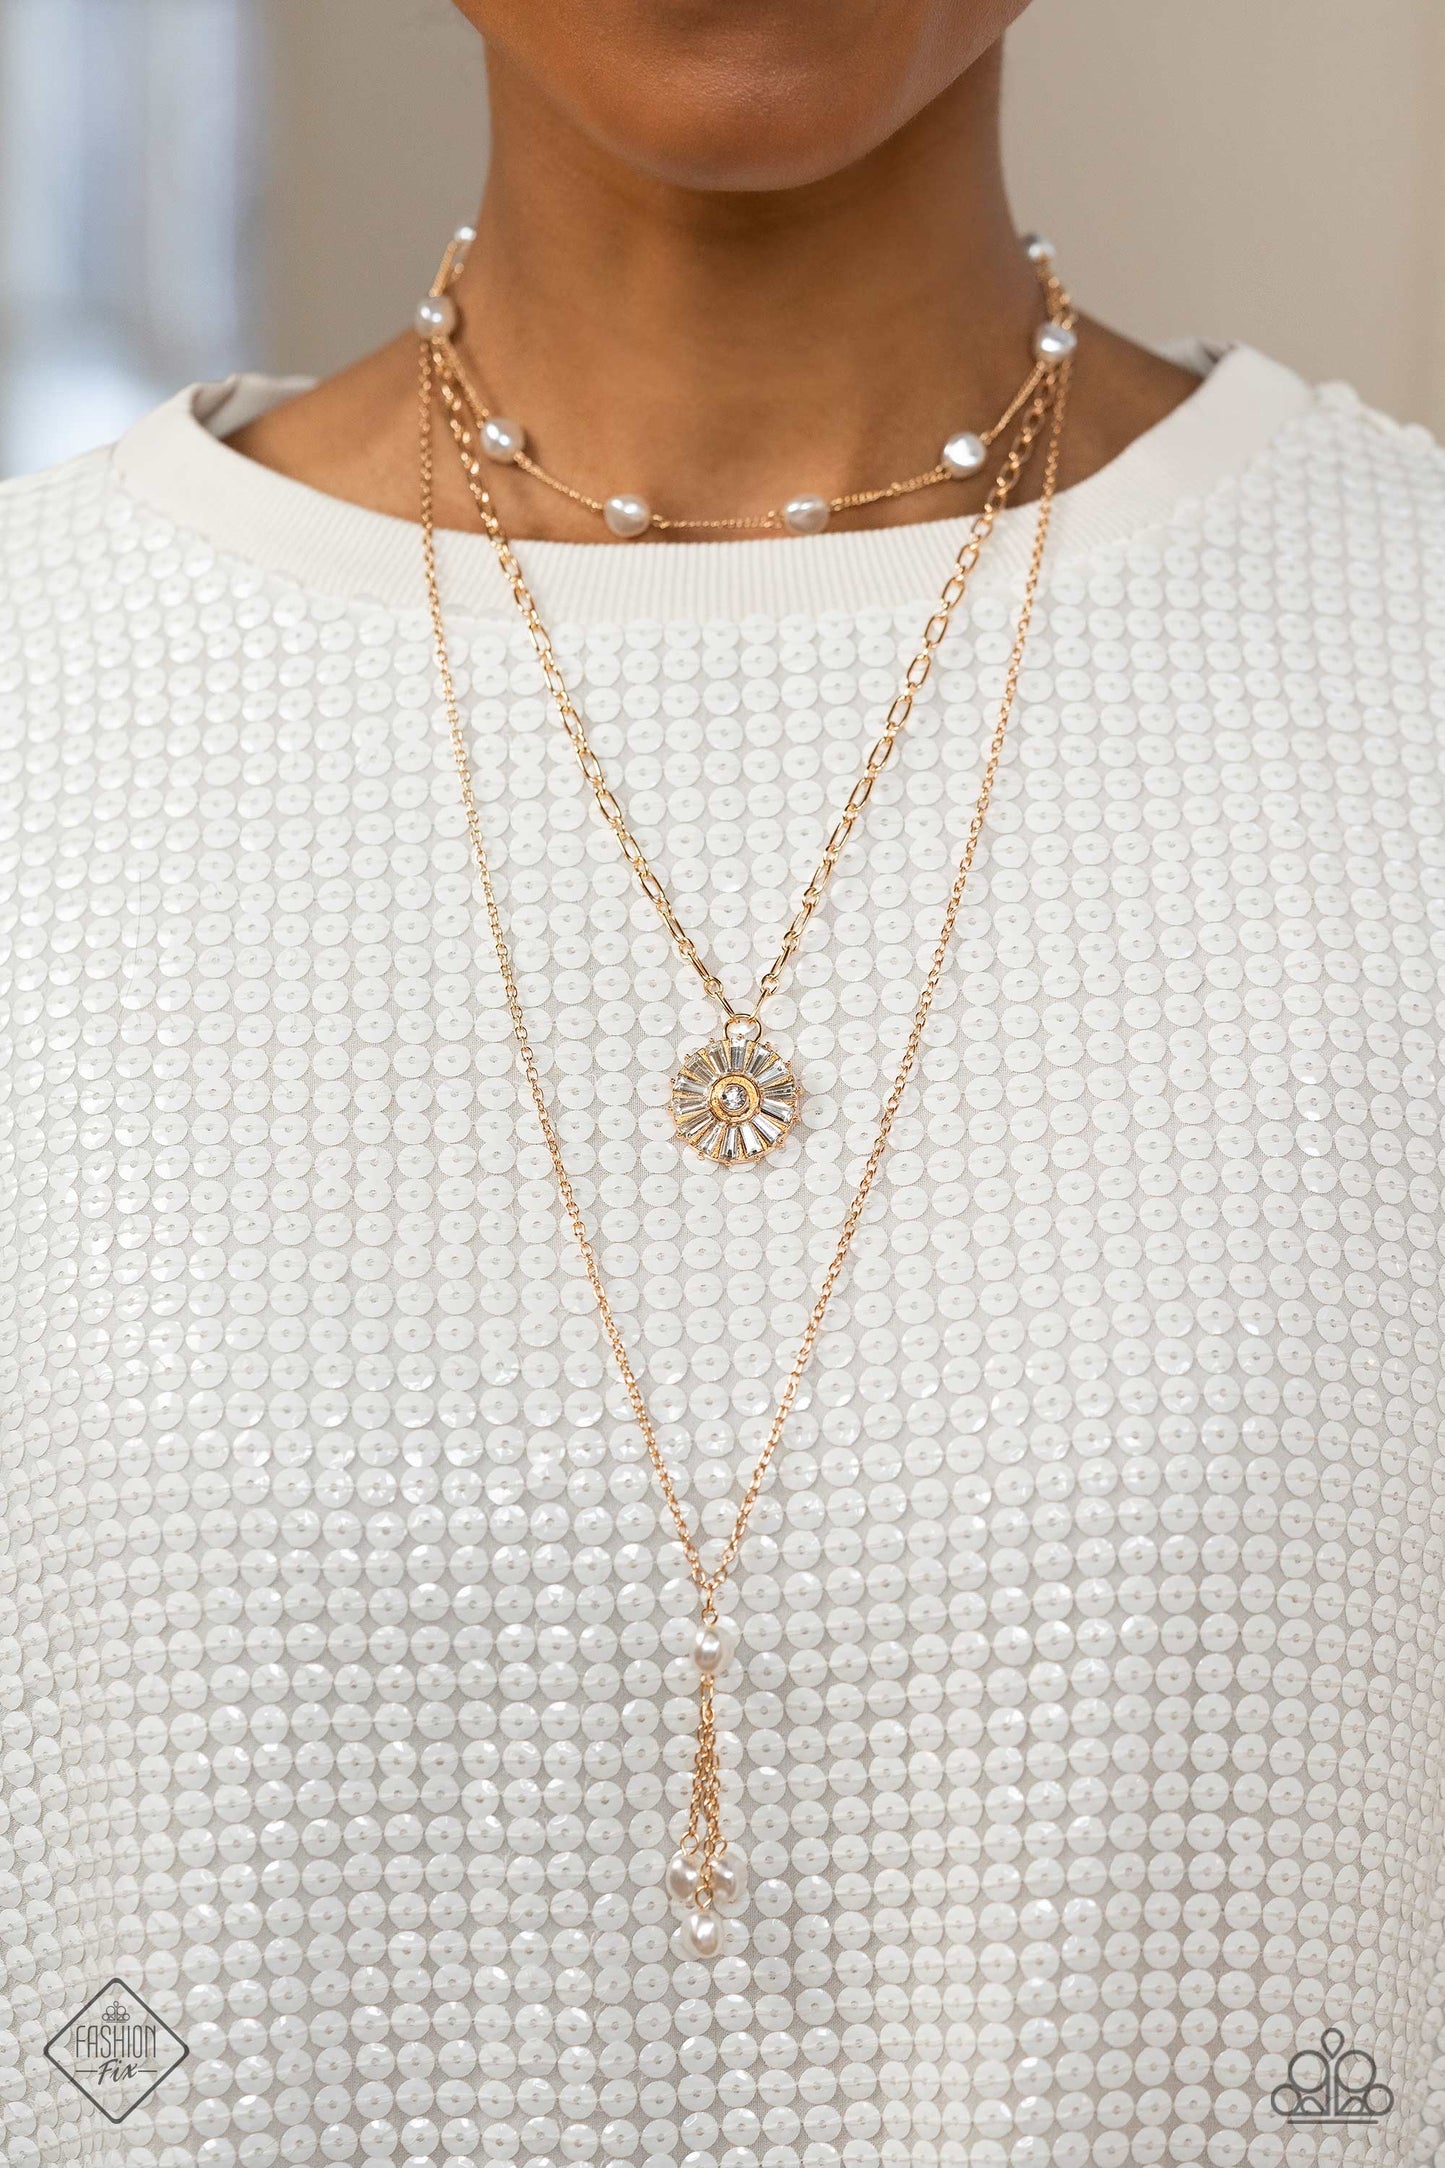 Paparazzi Accessories Audaciously Austen - Gold Three shimmery gold chains layer across the chest, with each strand featuring a different motif. Featured on the uppermost chain, white baroque pearls sporadically dot a dainty gold chain. Below it, a gold p